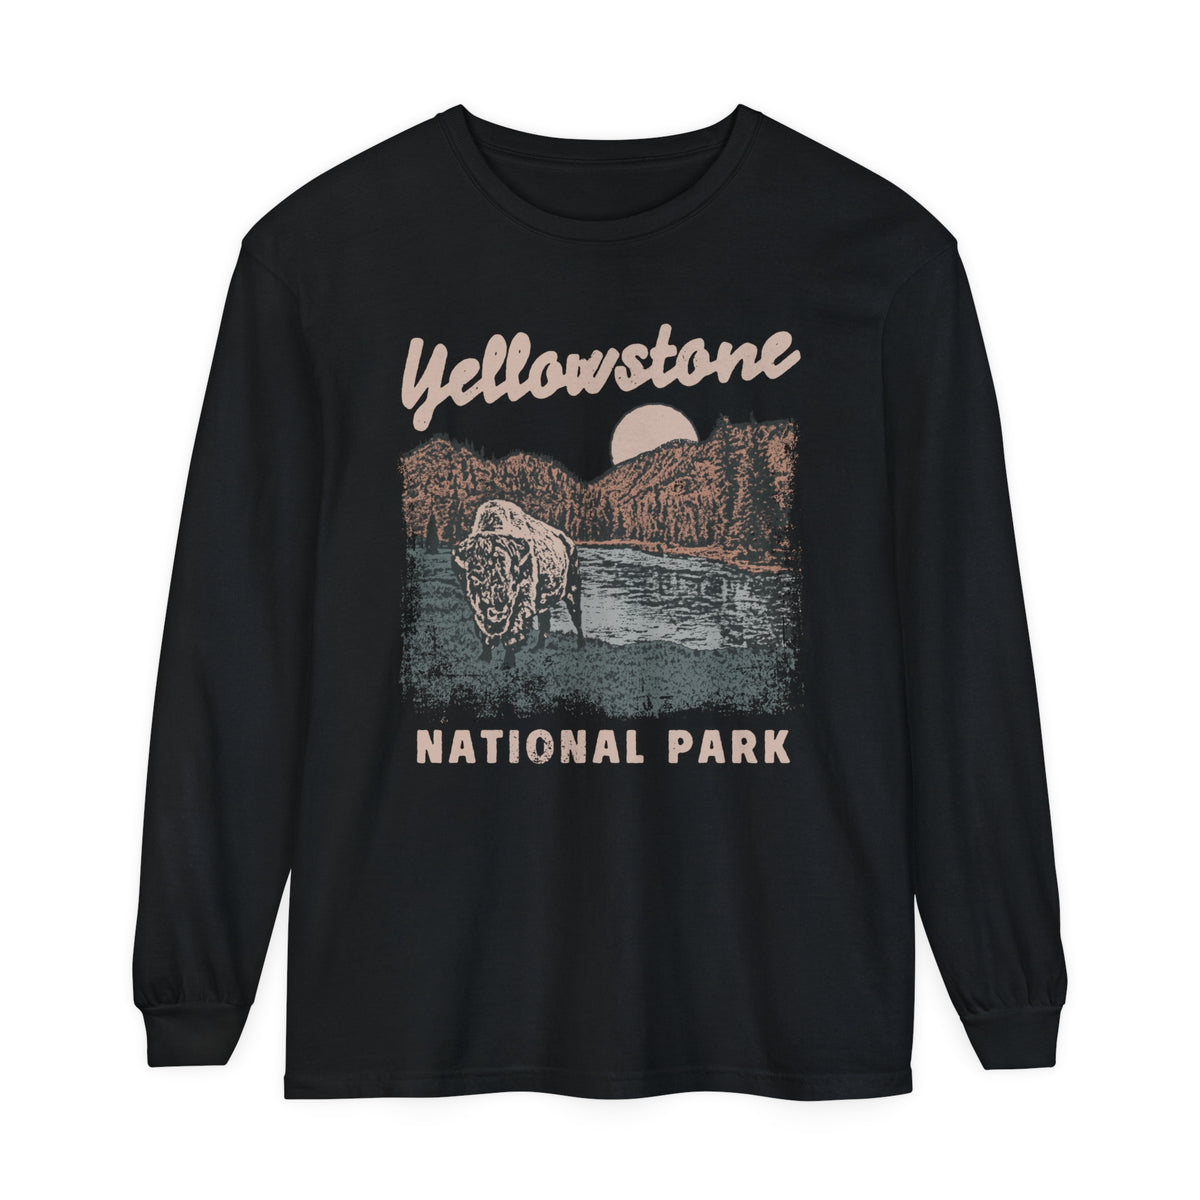 Yellowstone National Park Comfort Colors Unisex Garment-dyed Long Sleeve T-Shirt